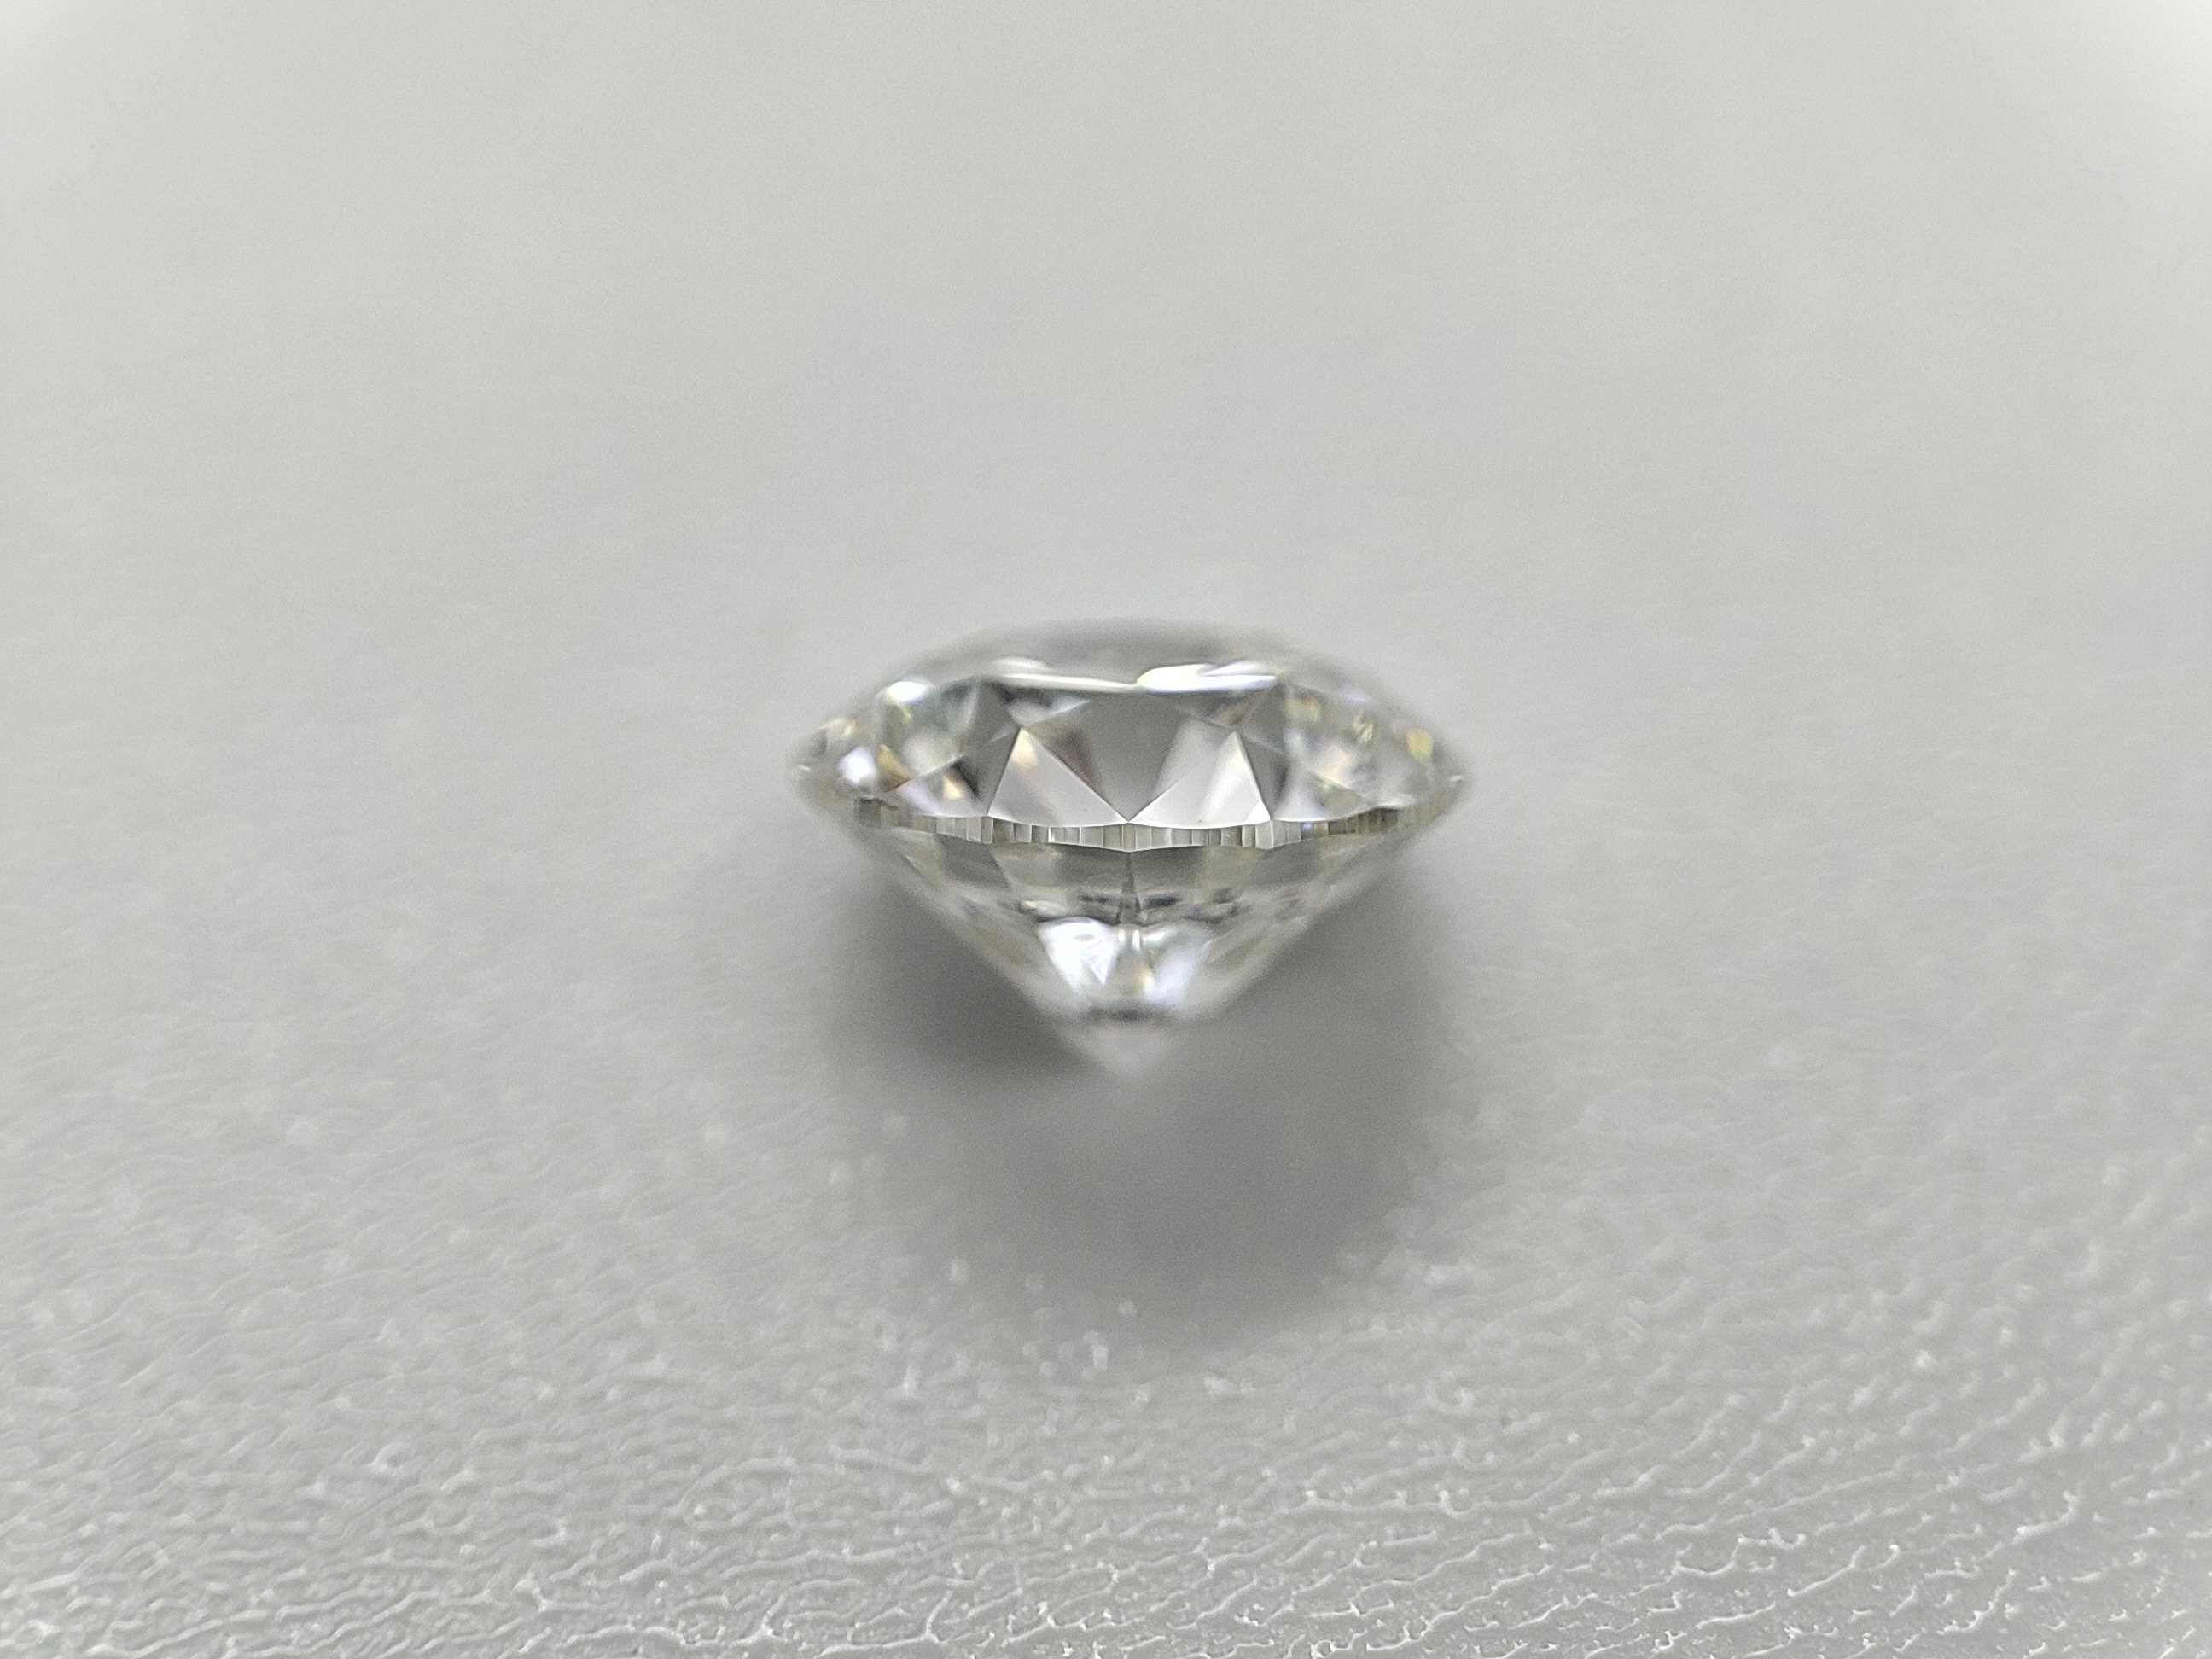 Brylant 0.55ct., H/VS2, ExExEx. GIA. Firma.